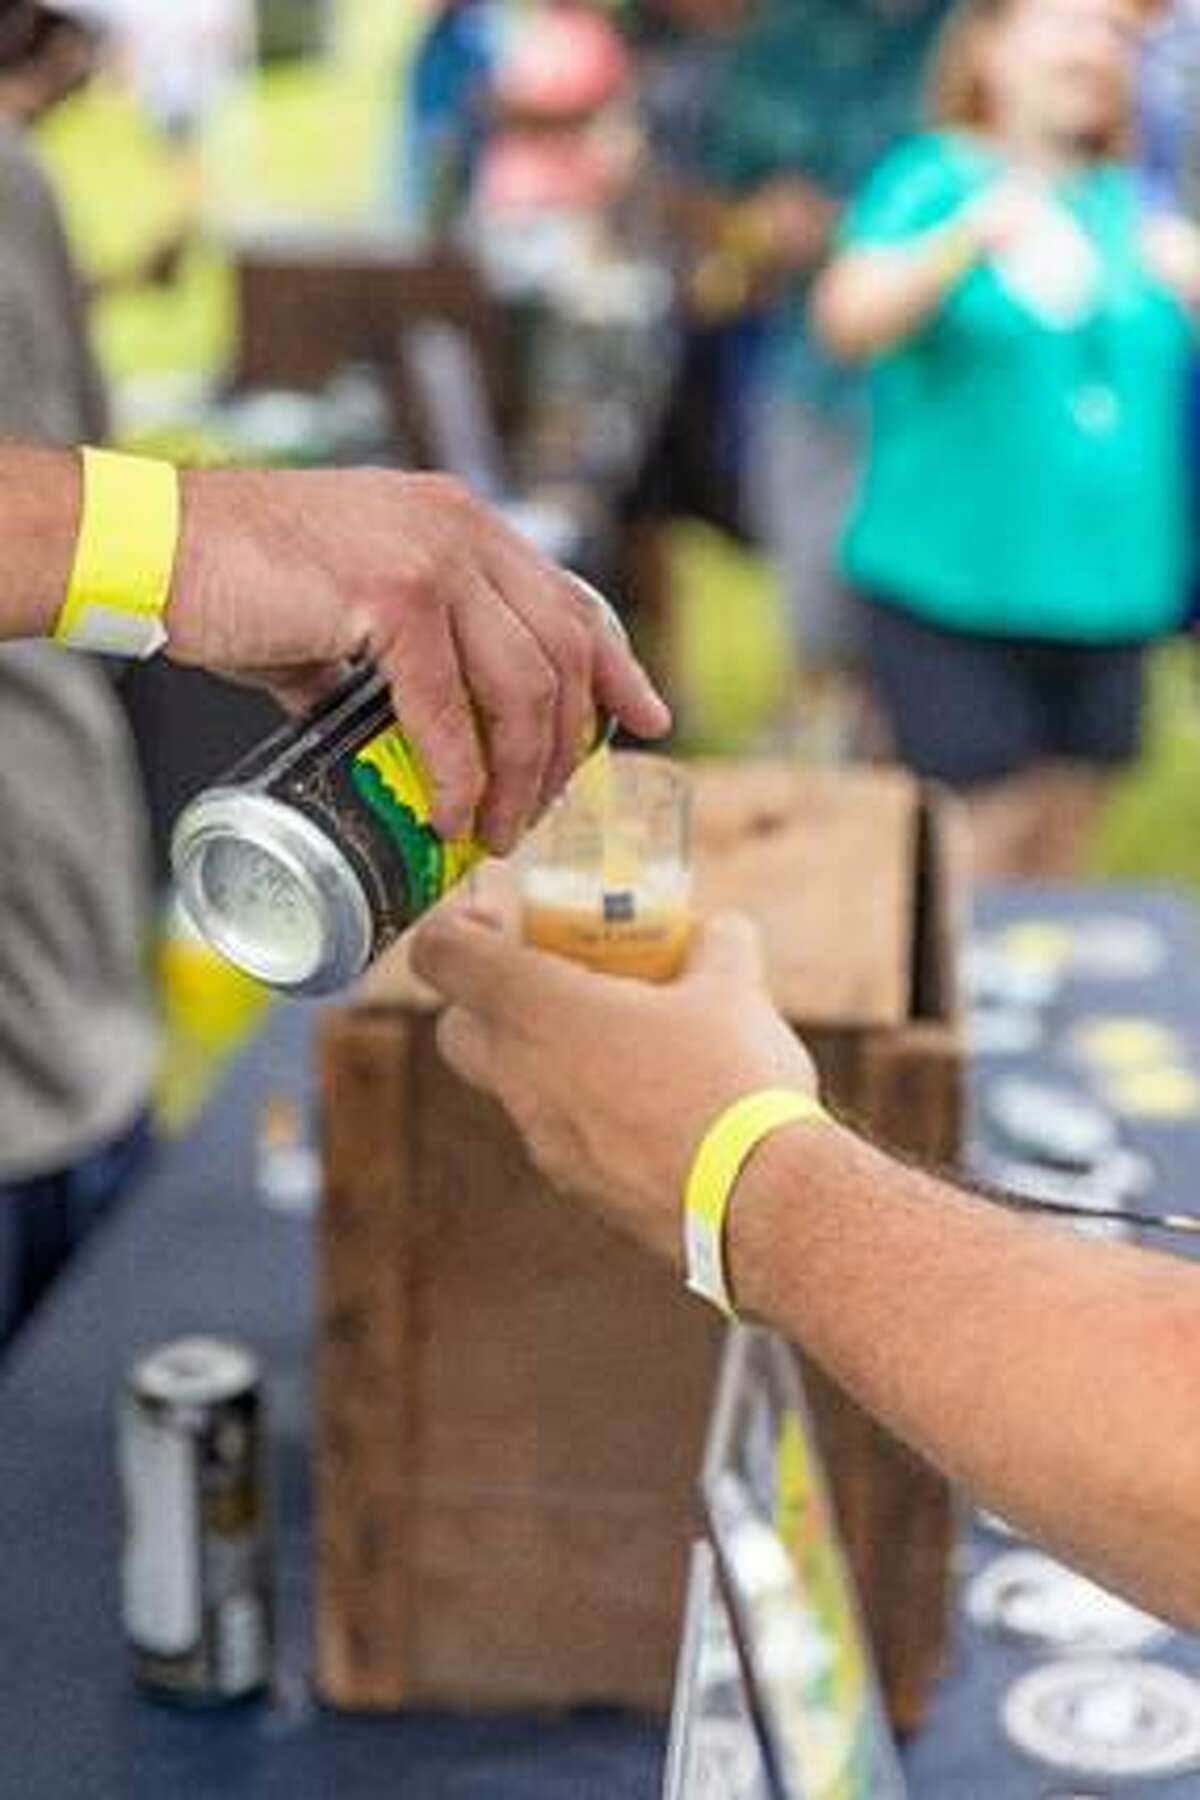 More than 1,800 people turned out for the 11th Annual Litchfield Hills BrewFest at Ski Sundown, presented June 11 by Torrington Savings Bank.